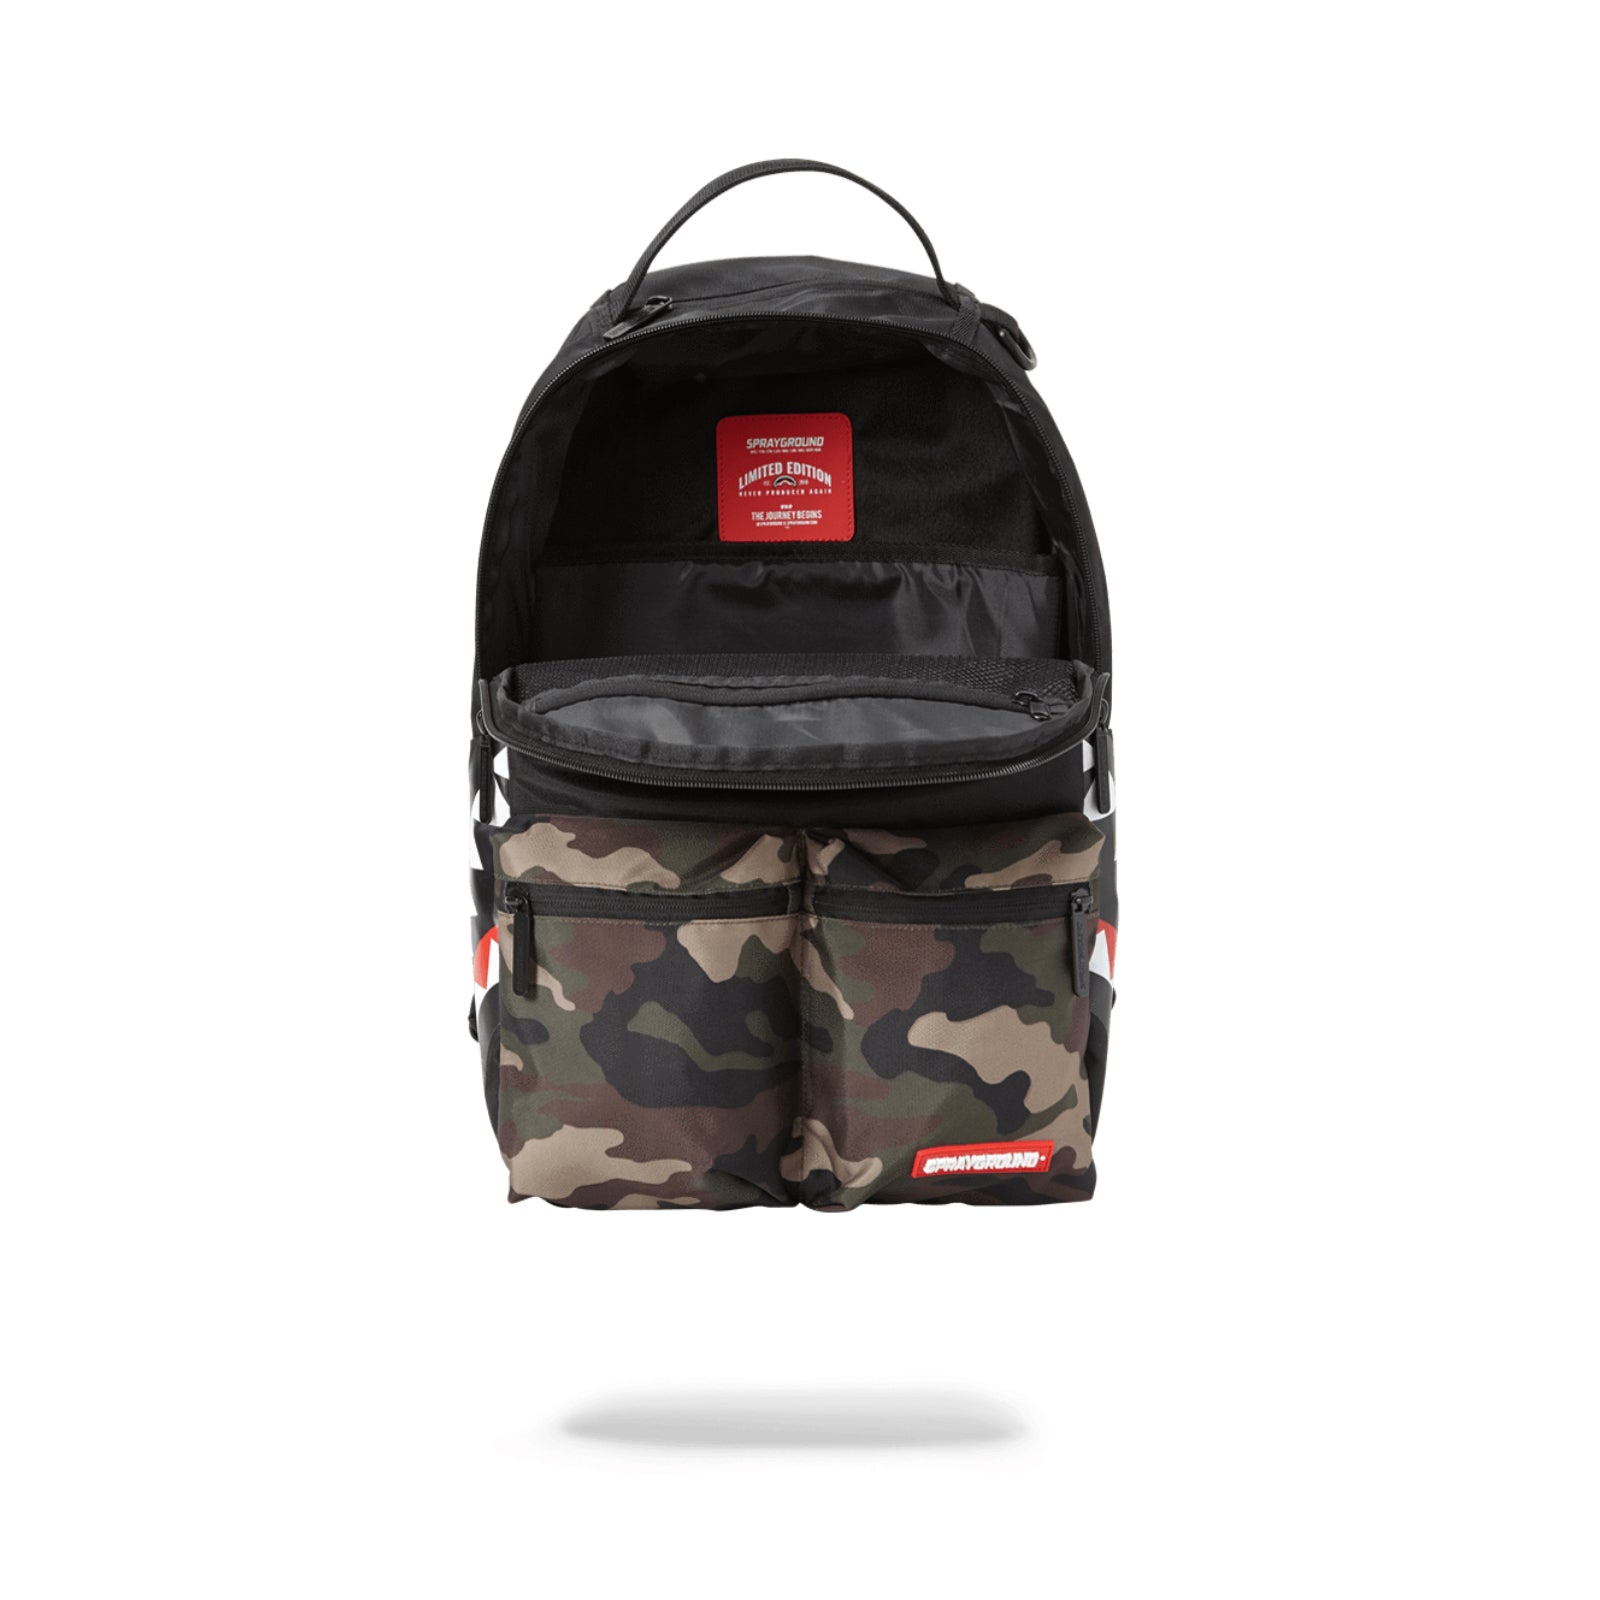 LA Clippers Double Cargo Sprayground Backpack